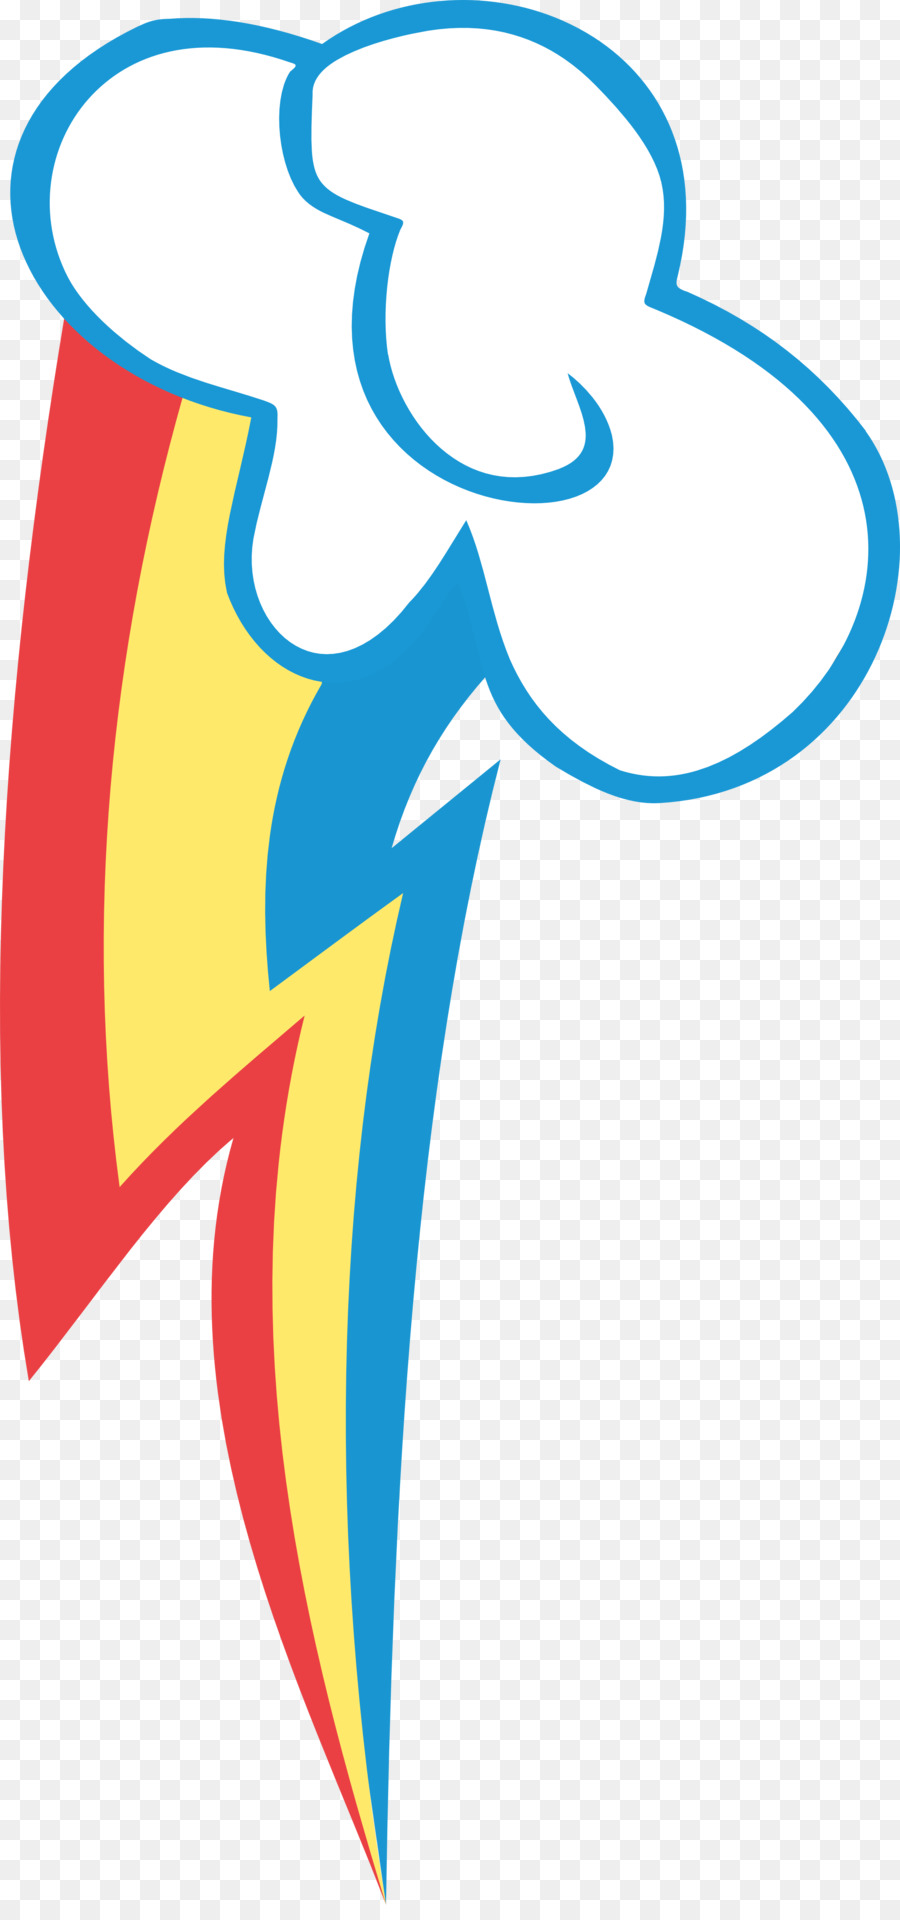 Rainbow Dash My Little Pony Cutie Mark Crusaders - lightning bolt png download - 2261*4786 - Free Transparent Rainbow Dash png Download.